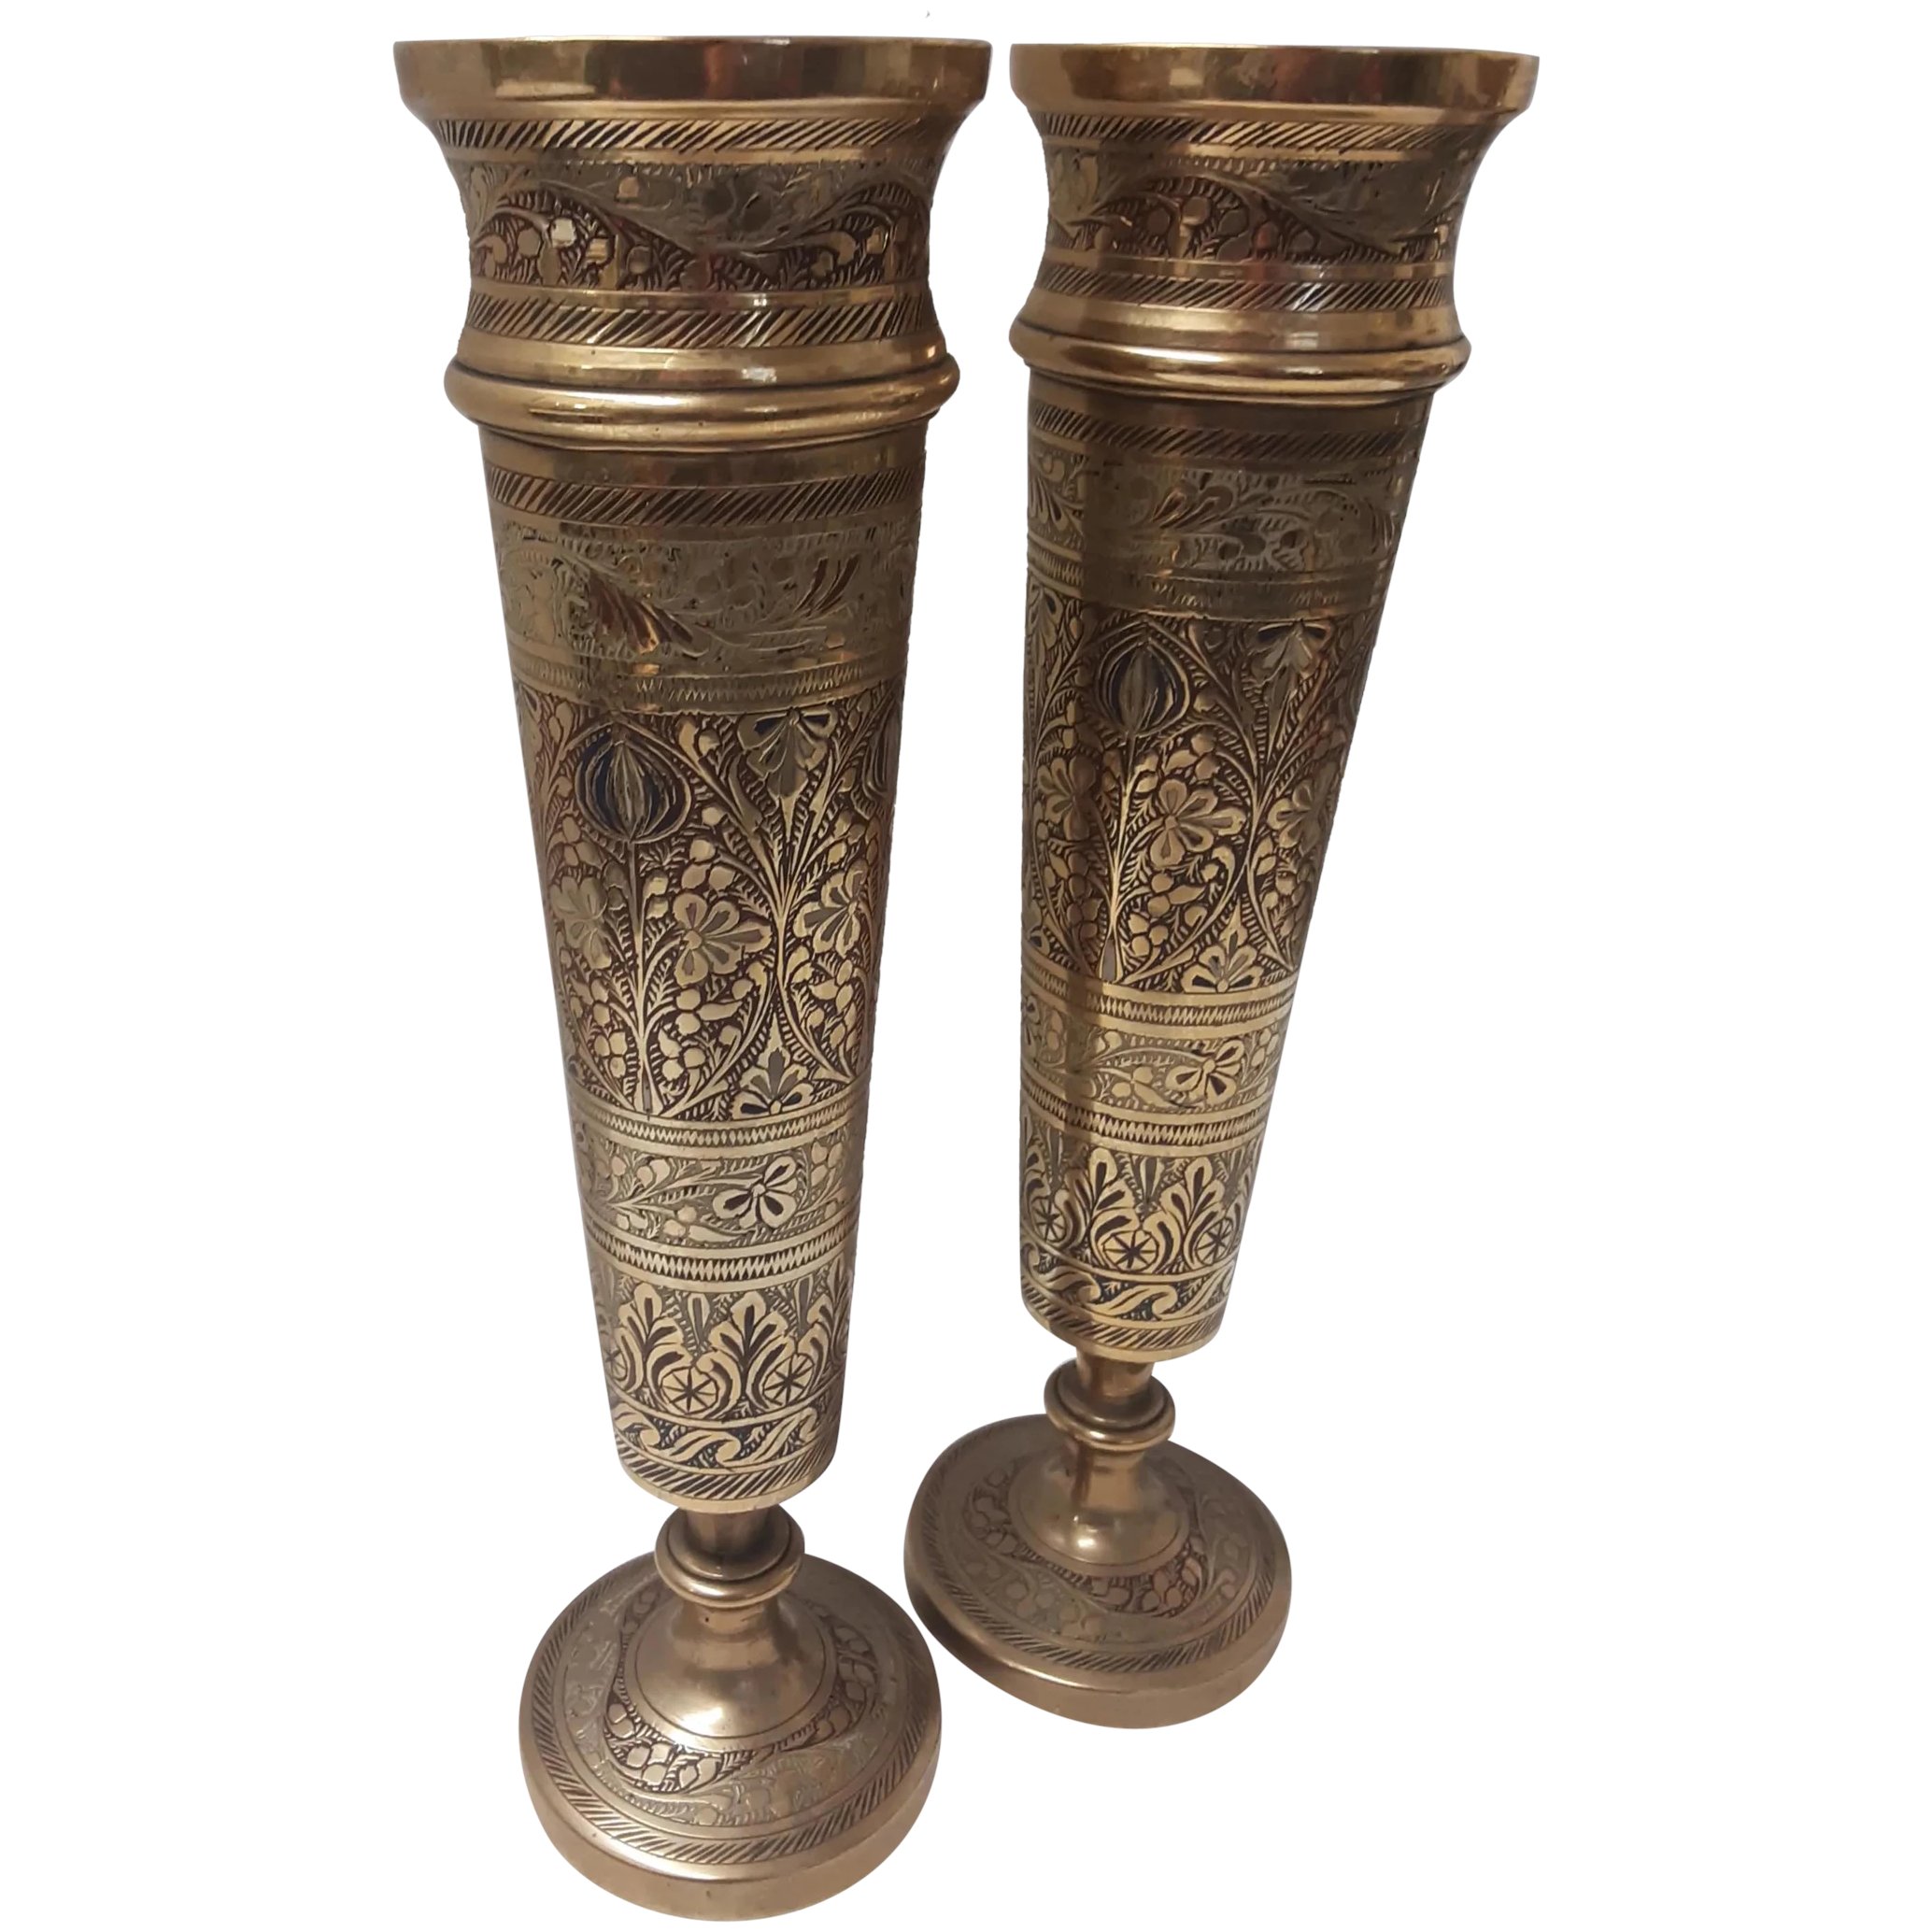 A 19th Century Pair of Magnificent Indian Benares Brass Vases